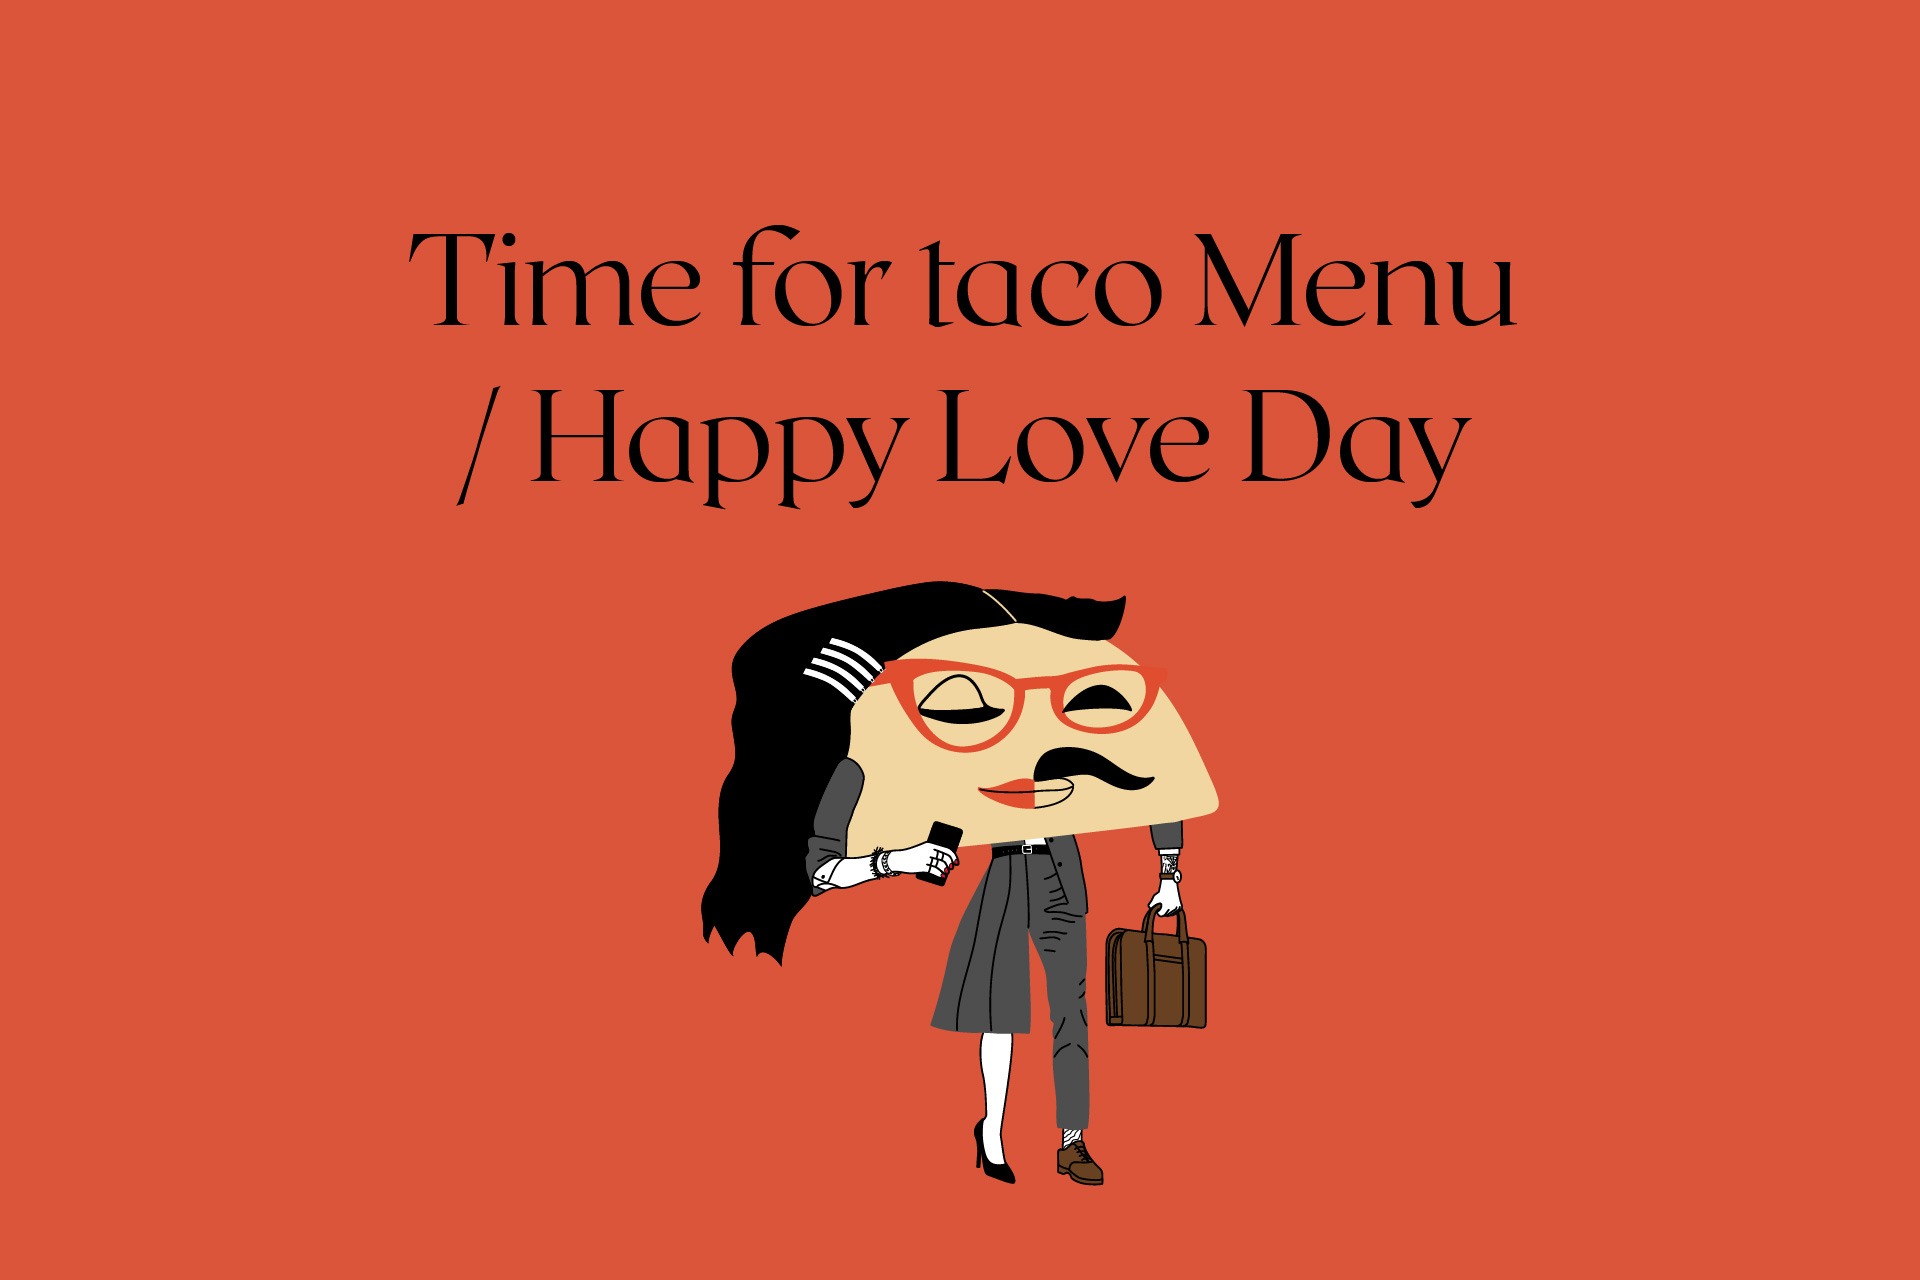 Time for taco Menu / Happy Love Day